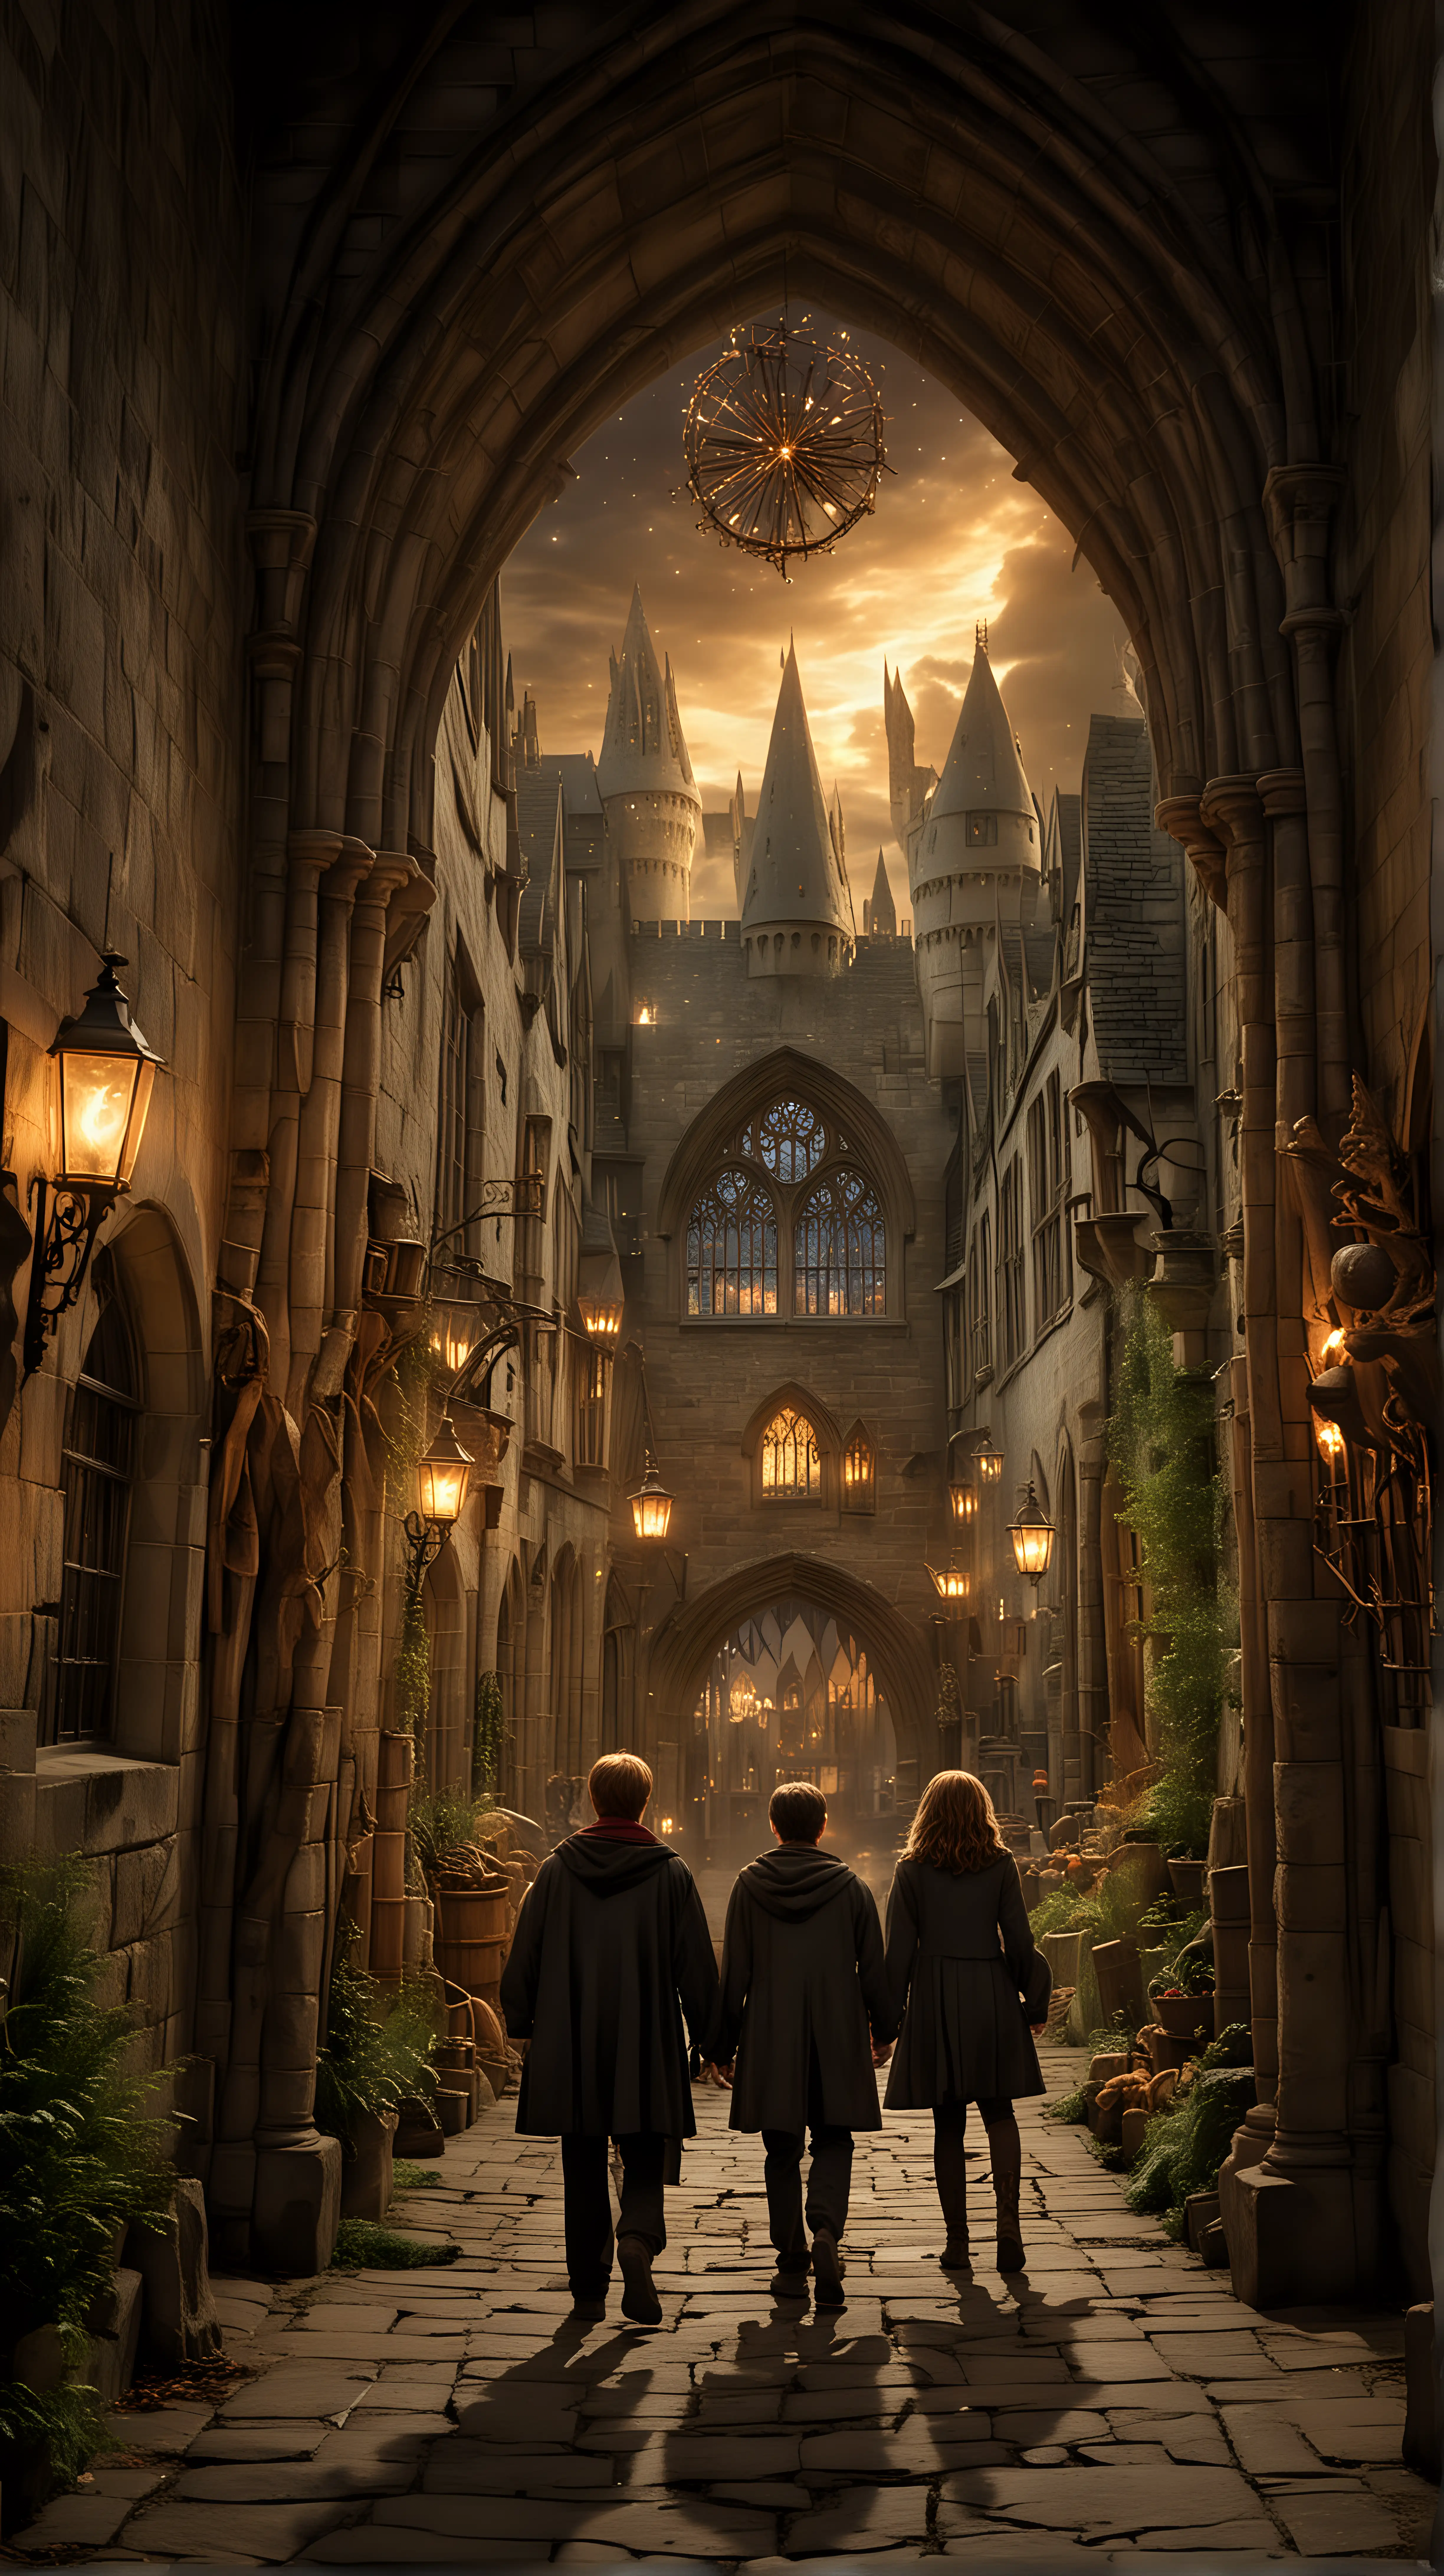 The main image showcases Harry Potter, Hermione Granger, and Ron Weasley standing side by side, facing the camera with smiles on their faces and a sense of determination in their eyes. They are positioned in the foreground, with Hogwarts School of Witchcraft and Wizardry looming majestically behind them. The trio is framed by the grand entrance of Hogwarts, its towering stone walls adorned with magical carvings and glowing torches. Behind them, the Great Hall's windows shimmer with warm light, hinting at the bustling activity within. The enchanted grounds of Hogwarts spread out around them, with the Quidditch pitch, Forbidden Forest, and Black Lake visible in the distance. In the sky above, the stars twinkle brightly, casting a magical glow over the scene. The title "Harry Potter" is displayed prominently across the bottom of the image, inviting viewers to join Harry, Hermione, and Ron on their unforgettable adventures.